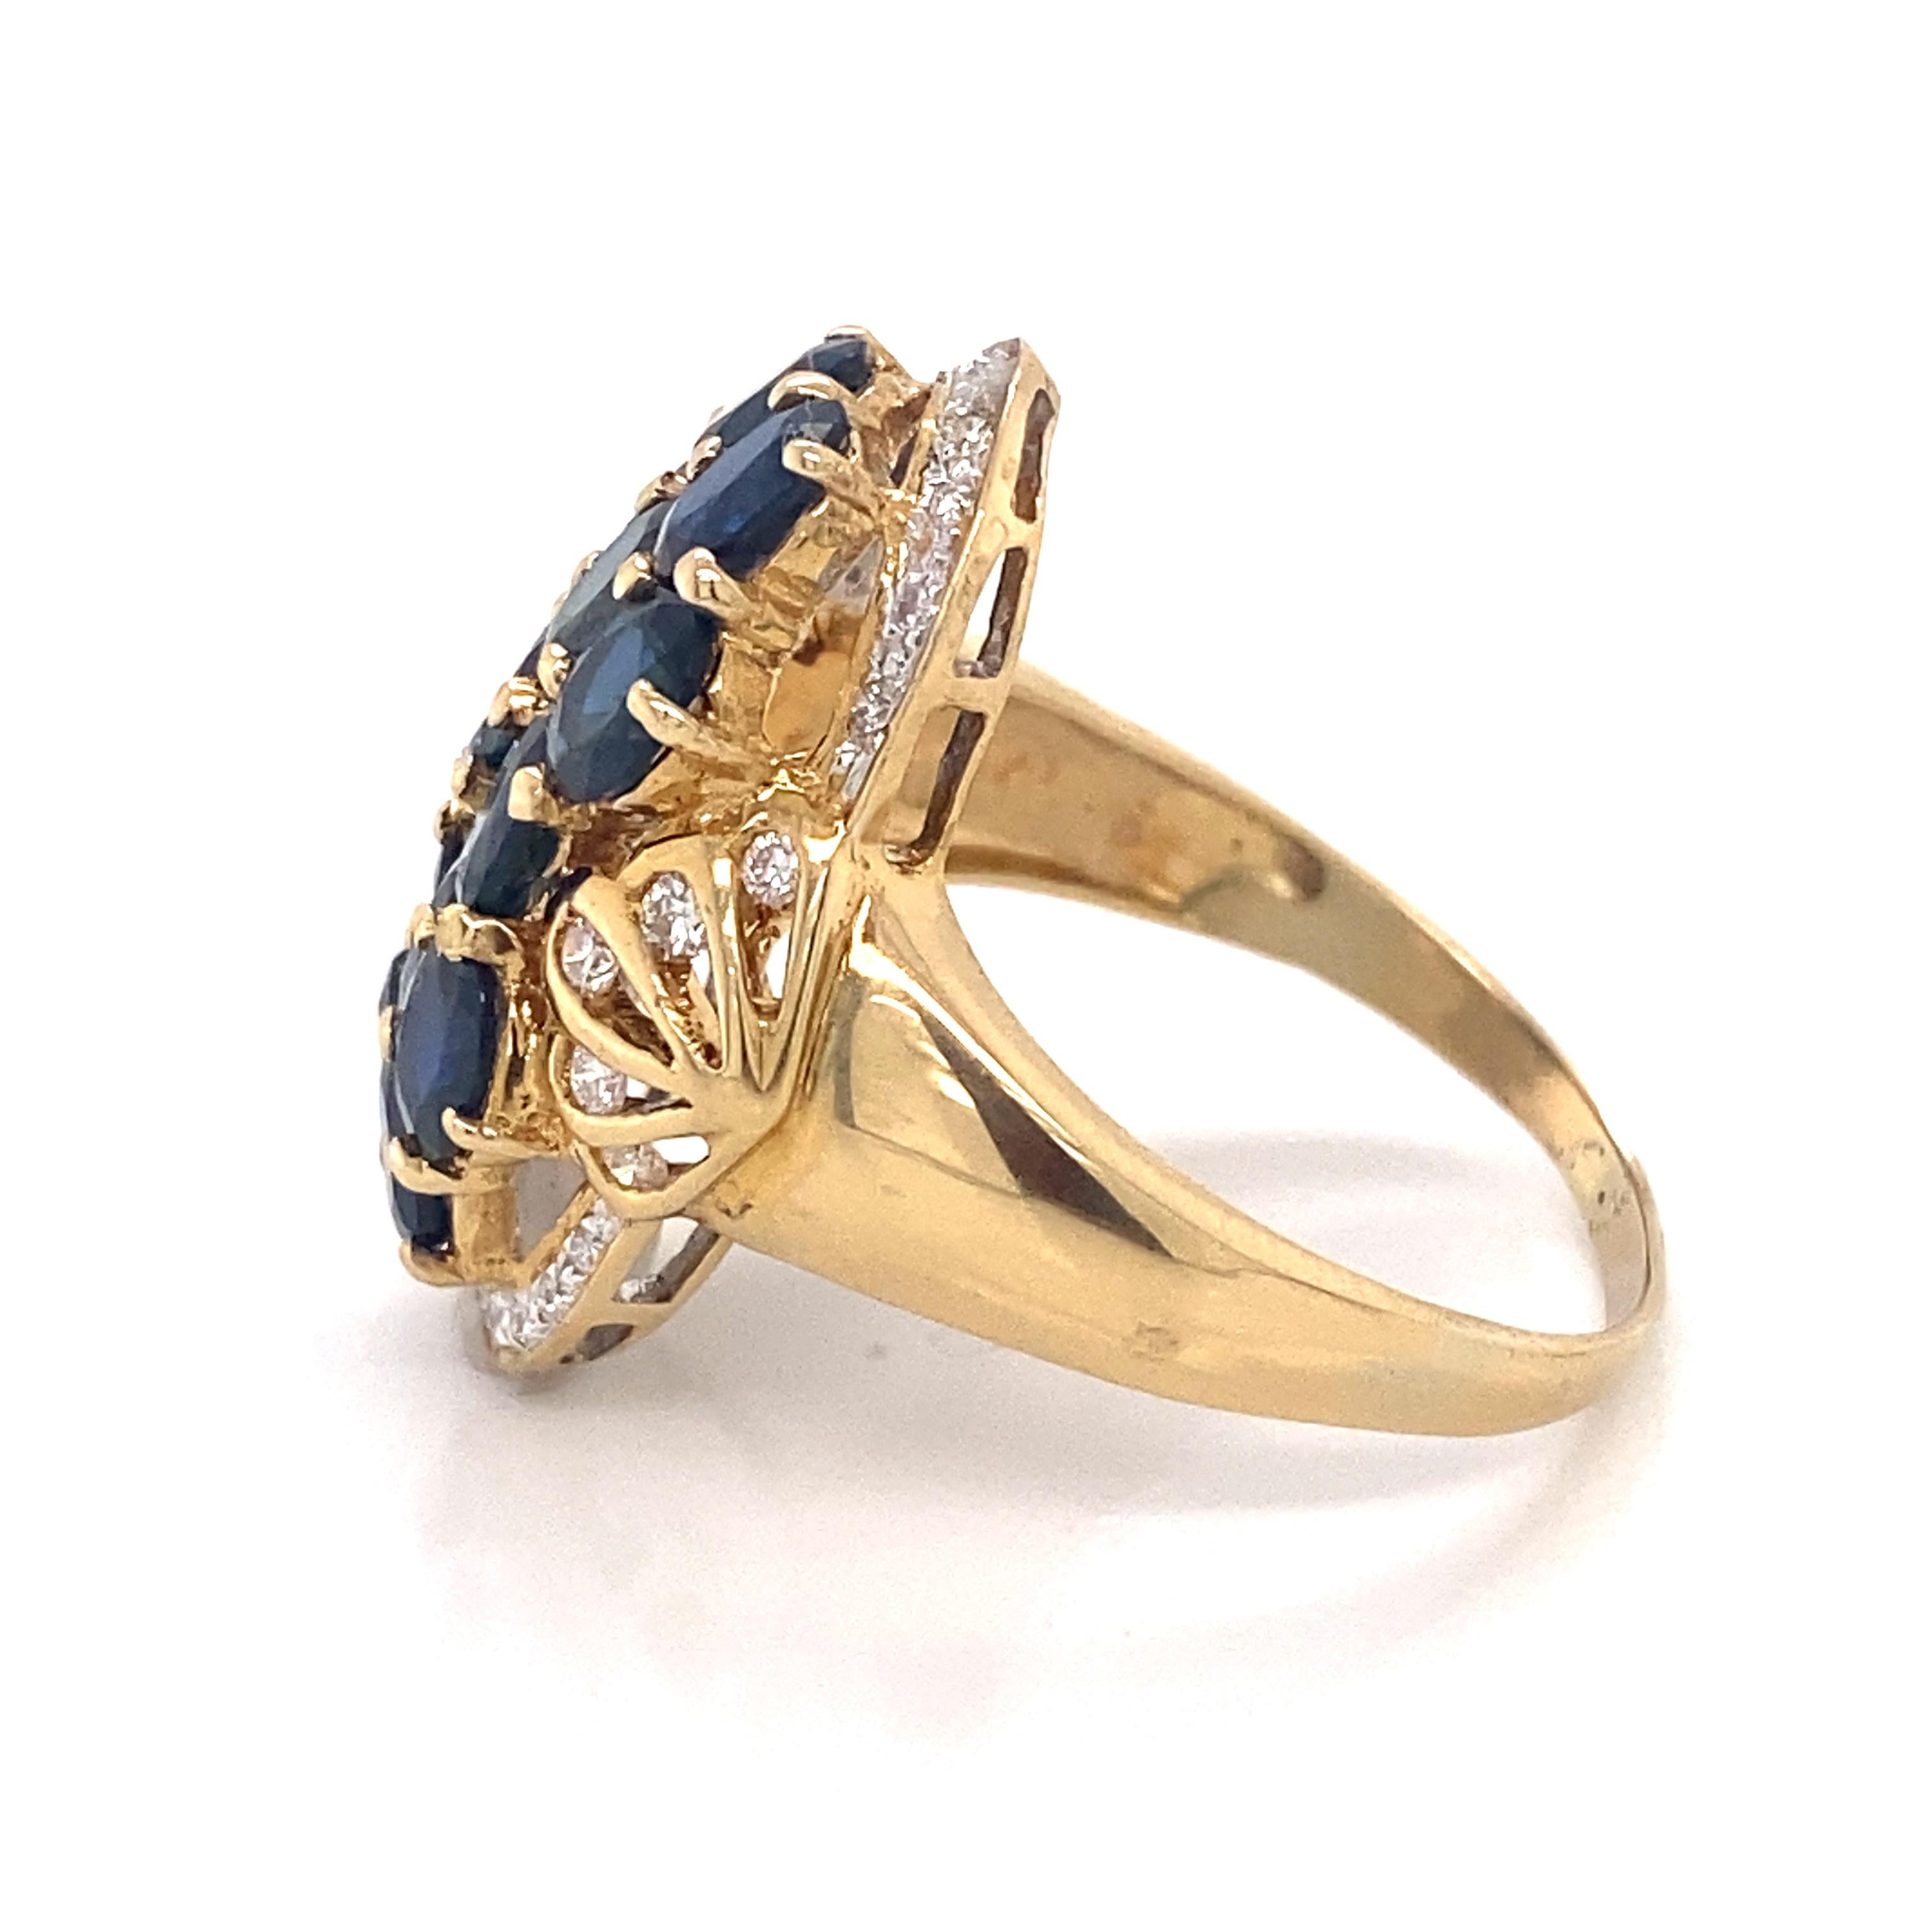 A lovely setting of rich, deep colored sapphires with diamonds in an 18k yellow gold ring. There are twelve individually set sapphires weighing approximately 4.8 ctw (measured in setting). The ring is a size 9.75 but can easily be resized. 